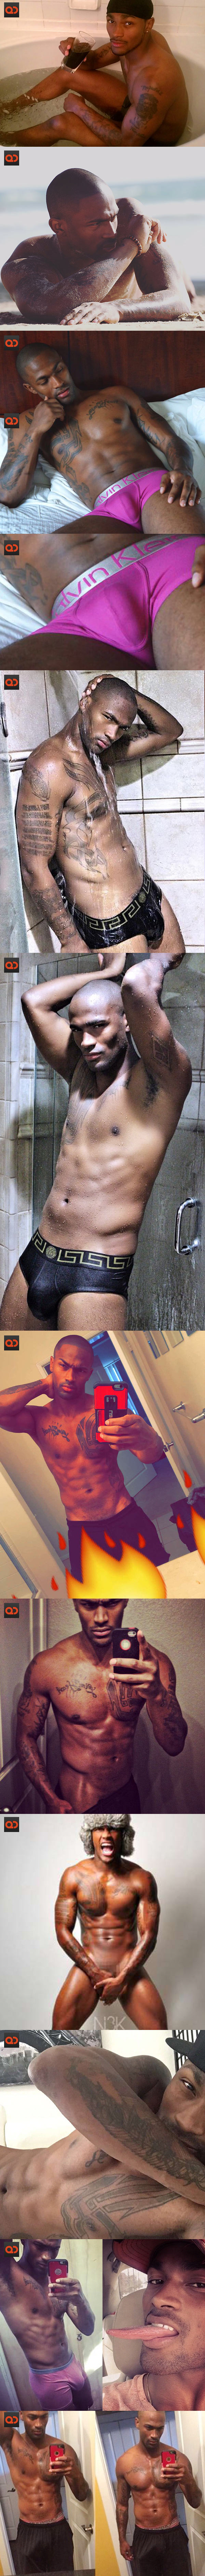 Keith Carlos, America Next Top Model Cycle 21 Winner, Is The Owner Of Huge Tongue And A Huge Cock!